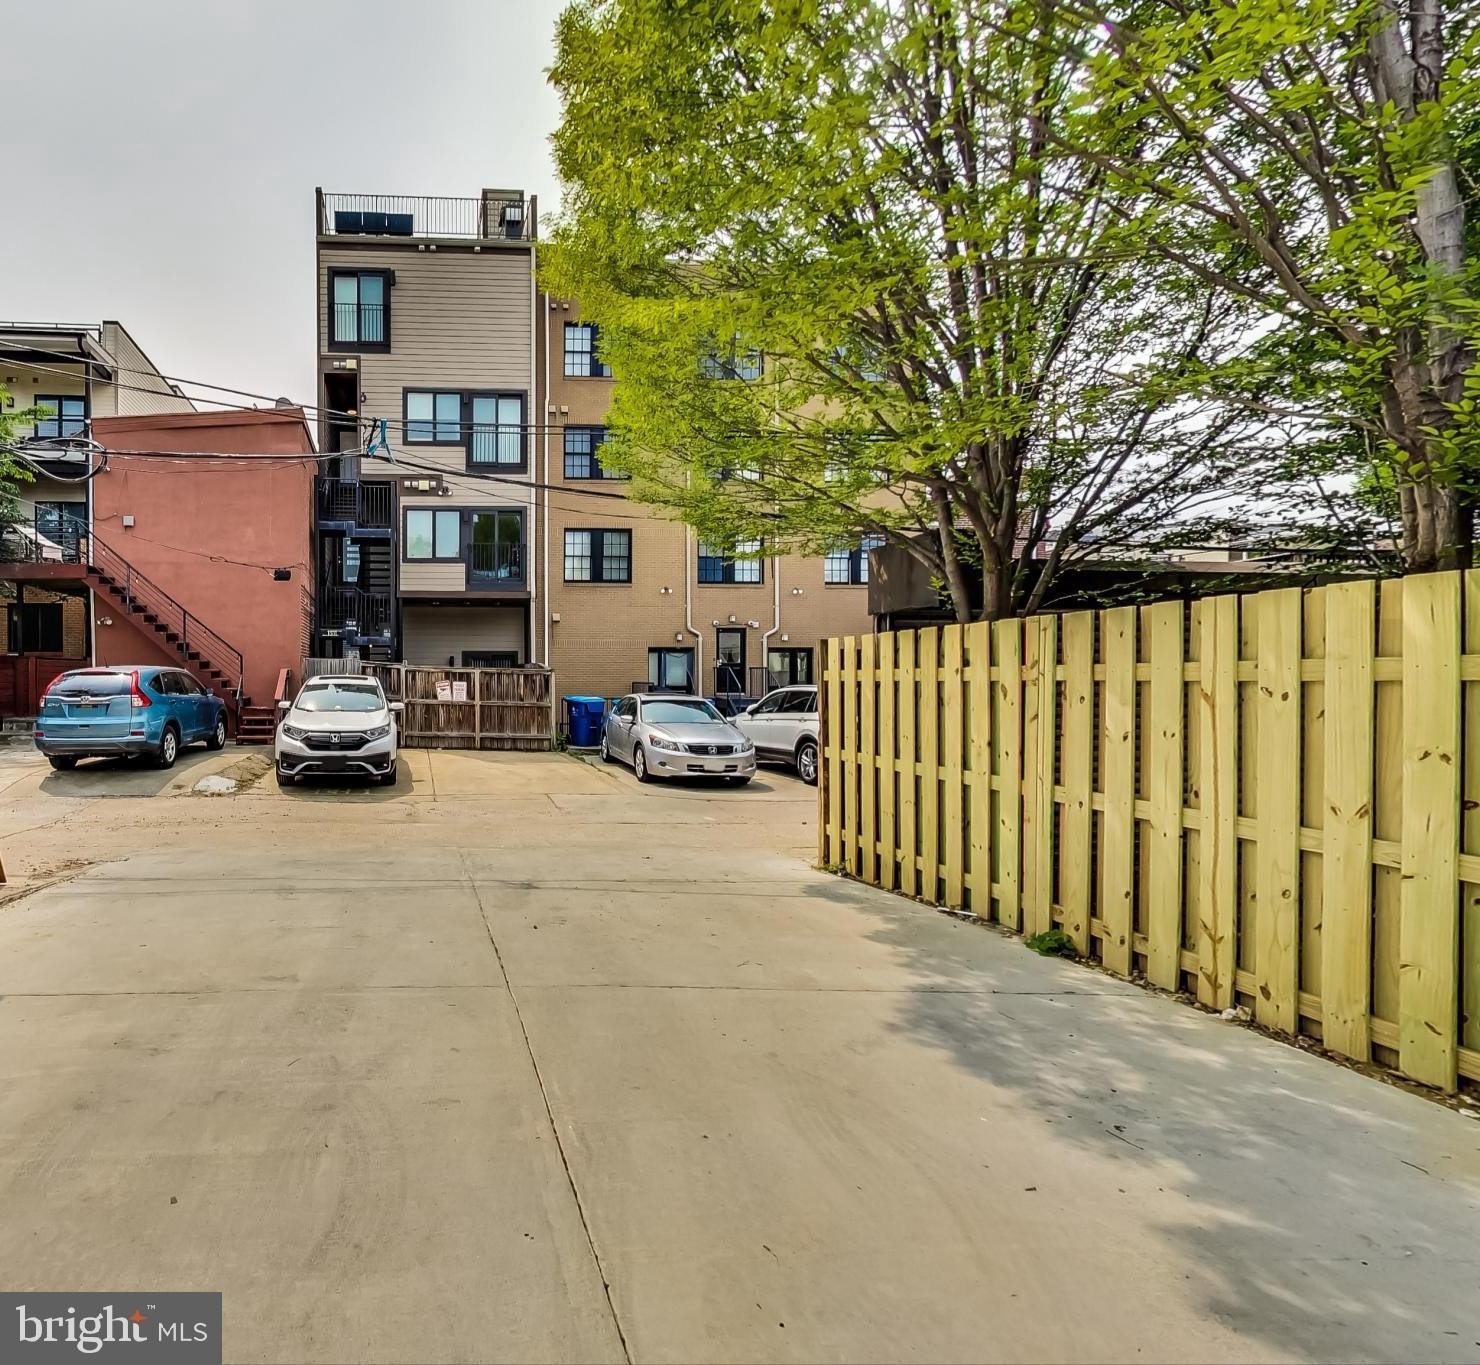 41. 1510 10th Street NW